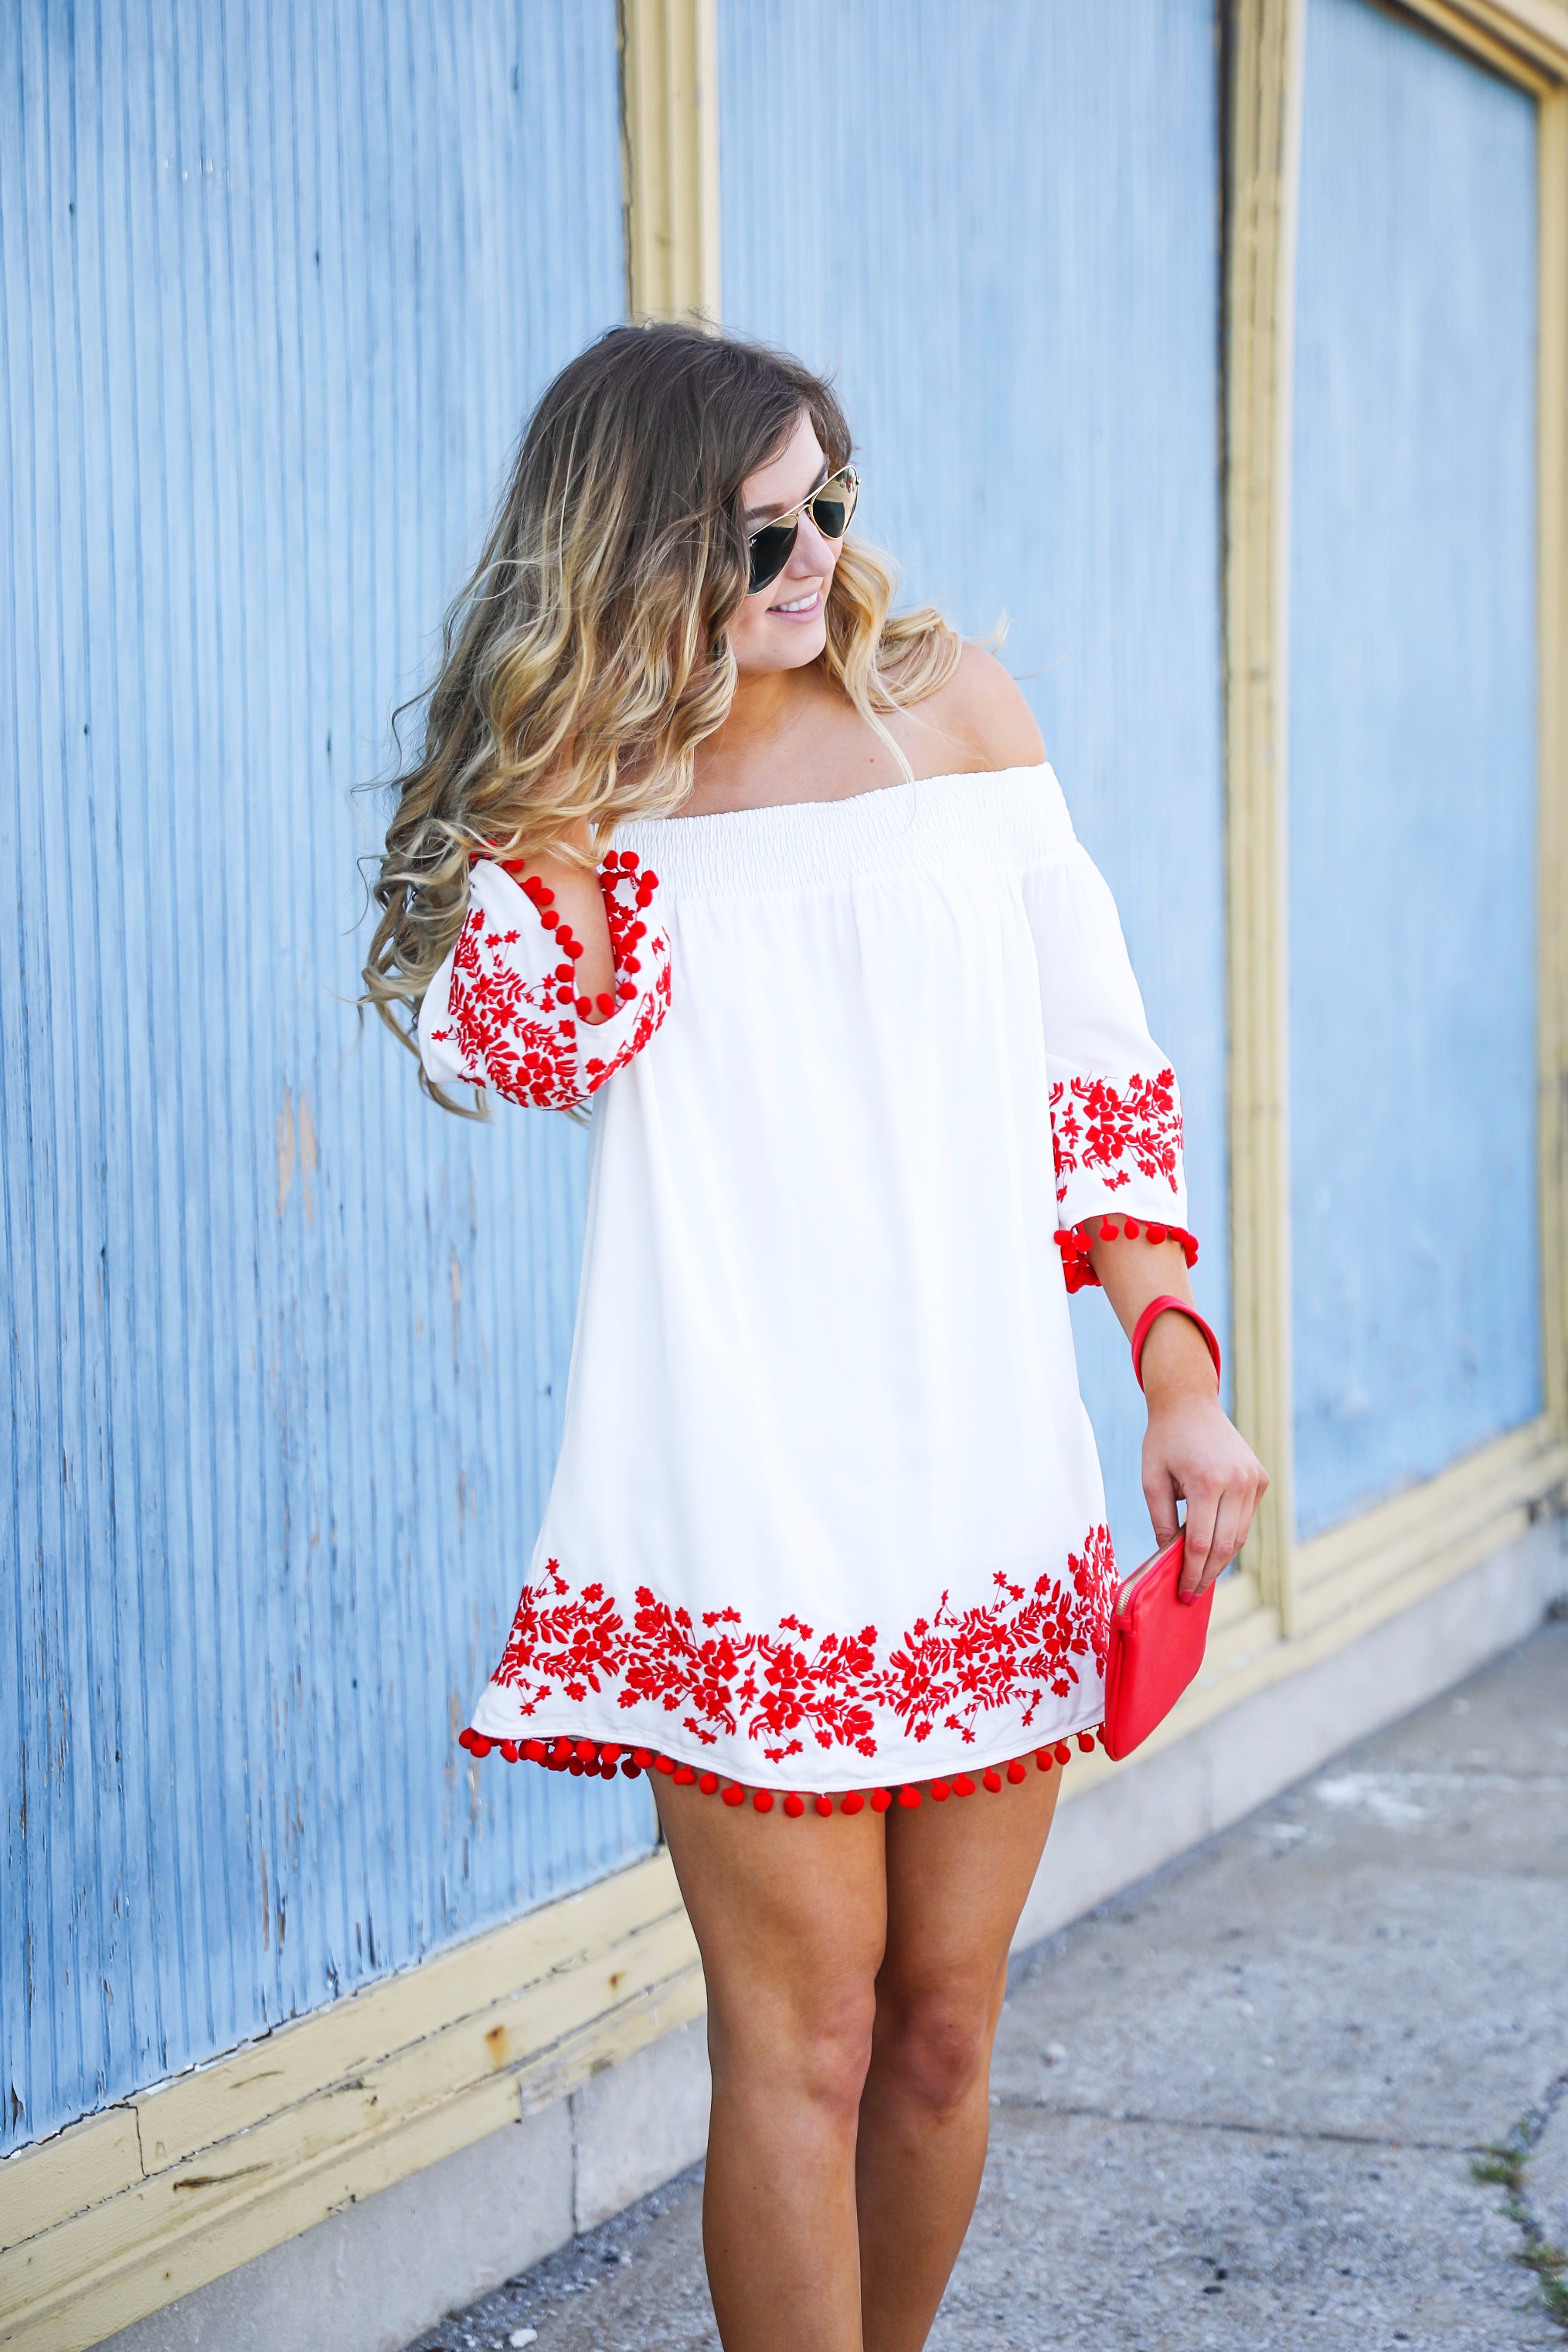 Looking for the perfect fourth of july or summer outfit? This red pom pom off the shoulder dress is so cute with it's embroidered hem! I wore this on the fourth of july! Featured on fashion blog daily dose of charm by lauren lindmark